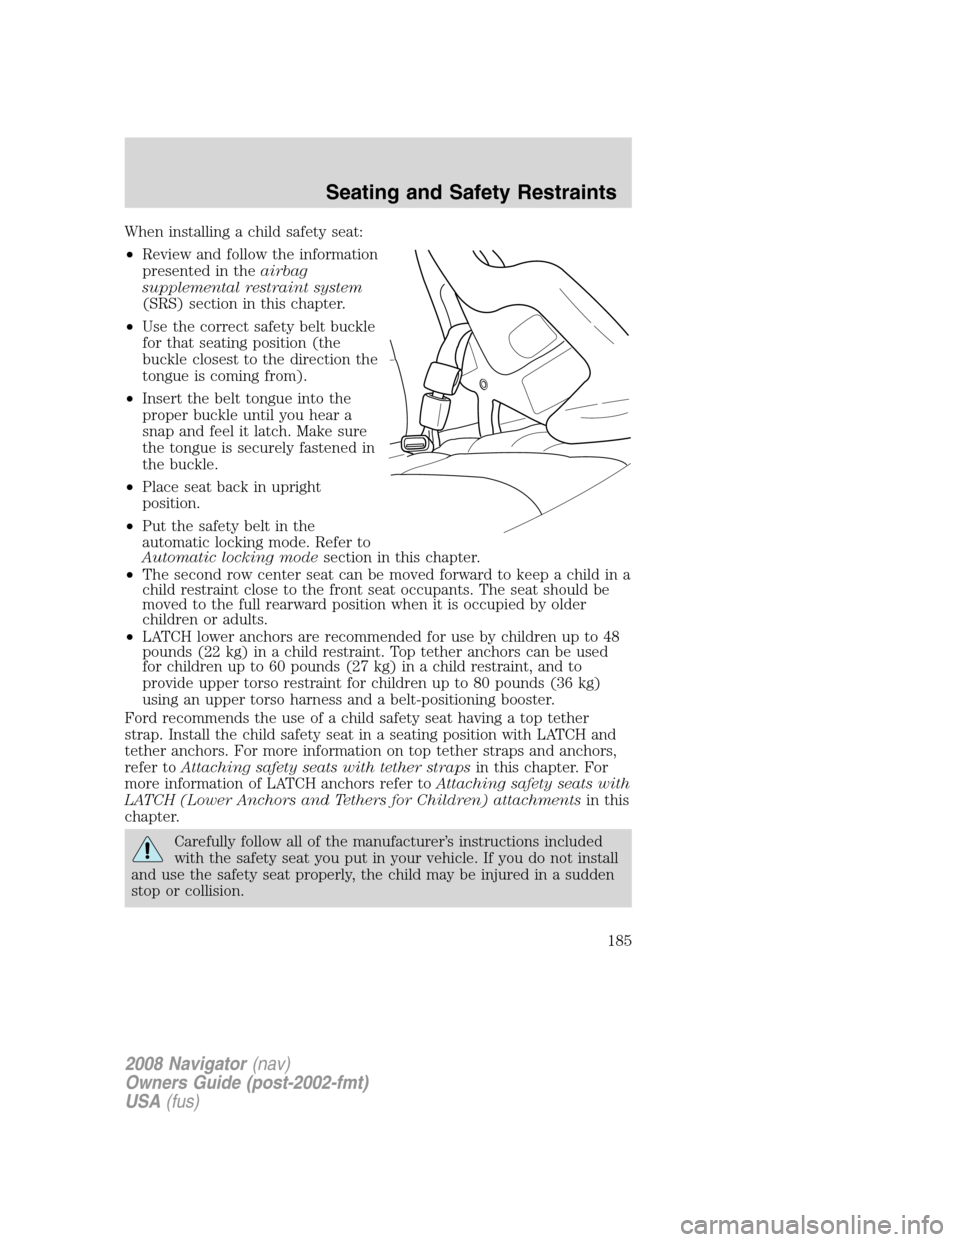 LINCOLN NAVIGATOR 2008  Owners Manual When installing a child safety seat:
•Review and follow the information
presented in theairbag
supplemental restraint system
(SRS) section in this chapter.
•Use the correct safety belt buckle
for 